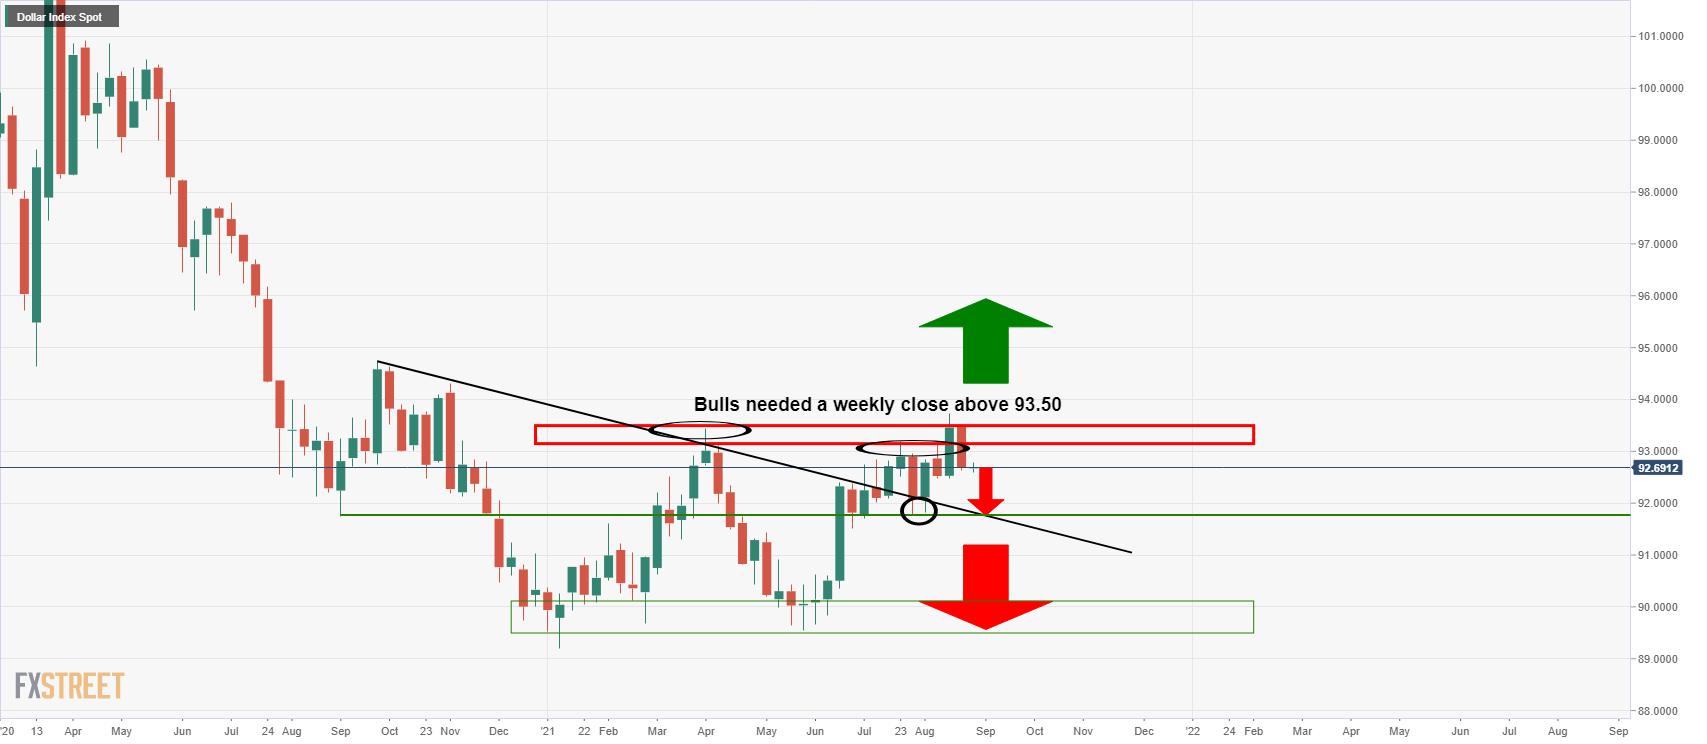 Gold Price Forecast: All eyes look ahead to critical US data events